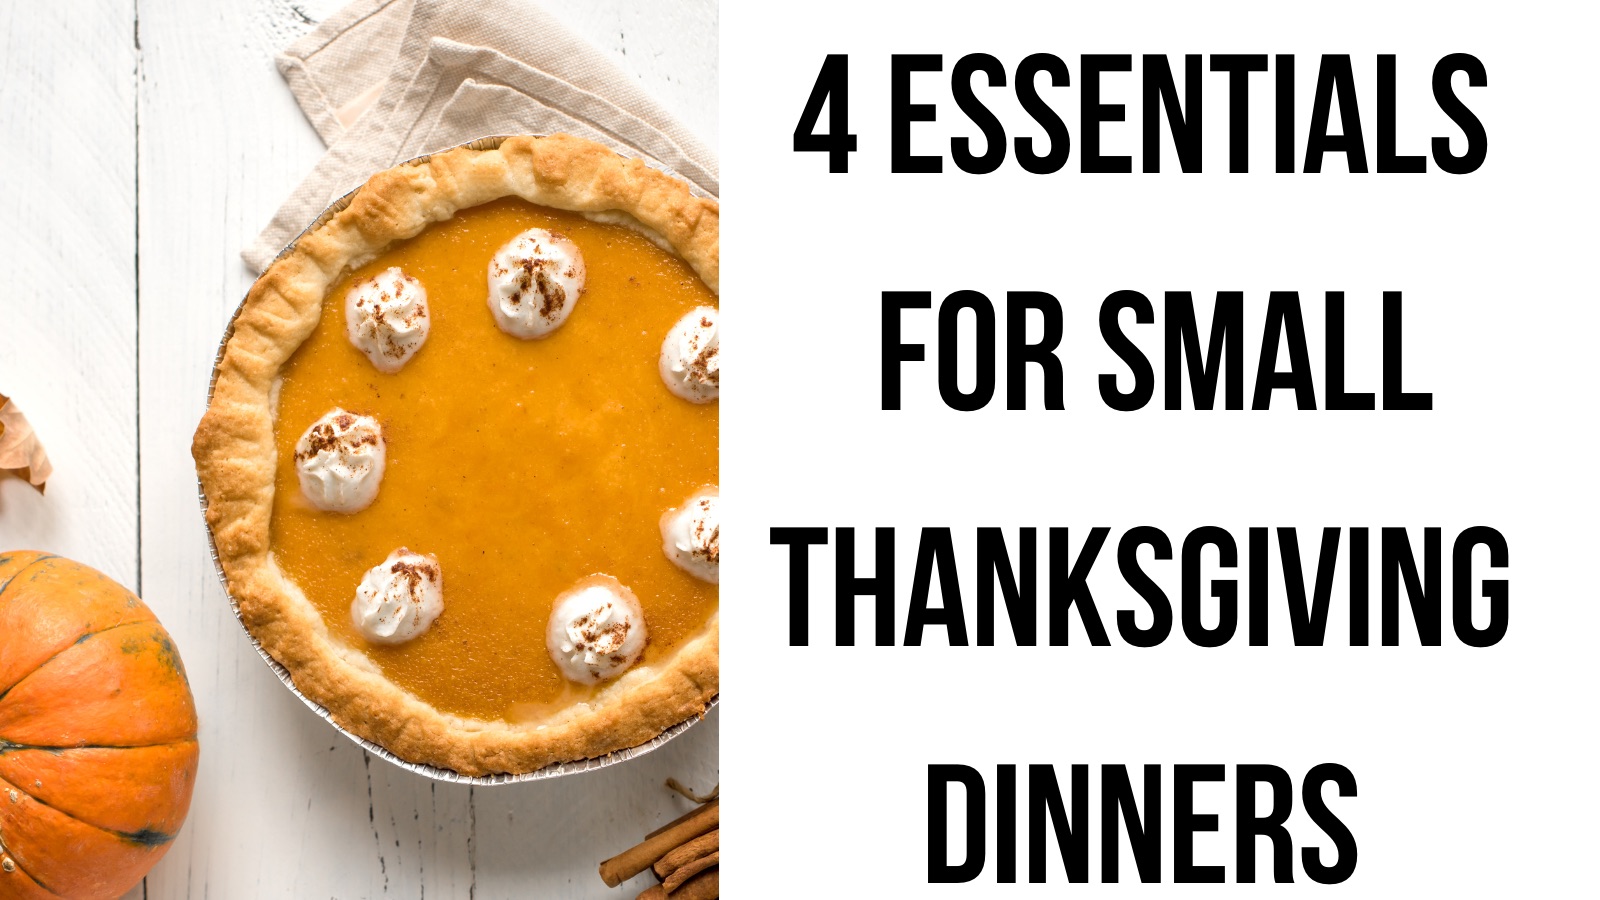 4 essentials for small thanksgiving dinners!